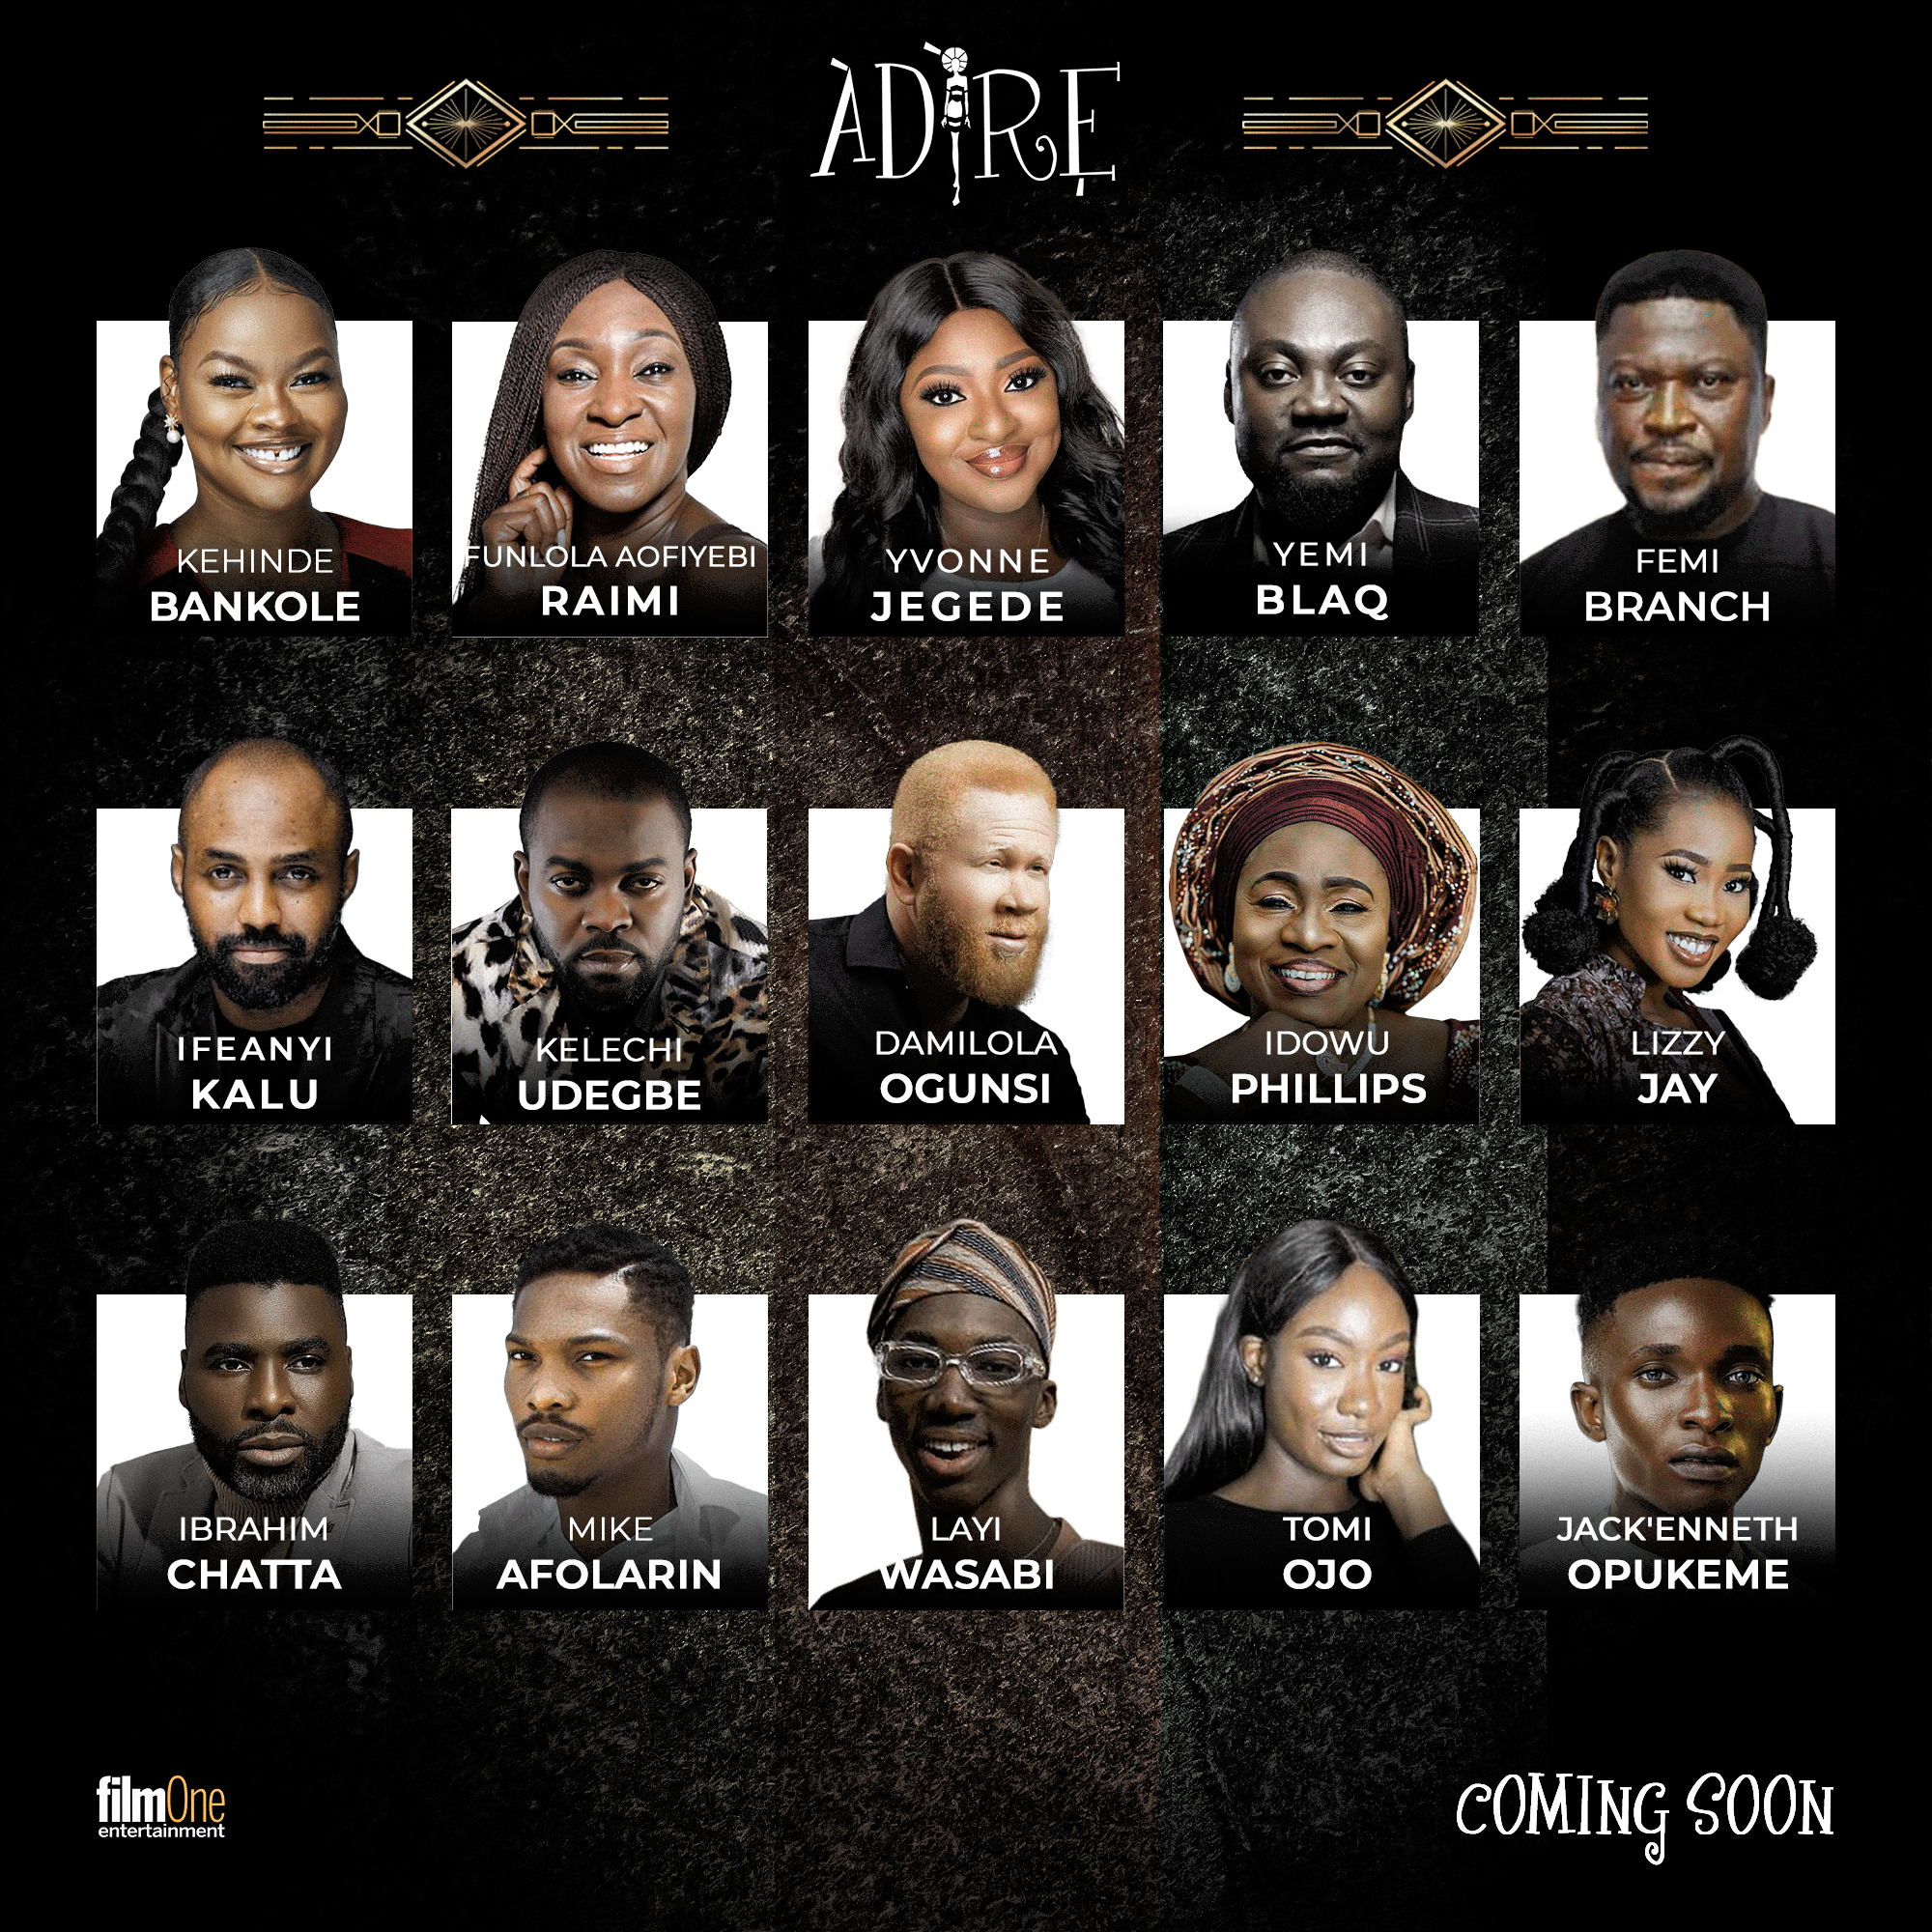 Cast Creative - First Film One Original “Adire” Directed By Adeoluwa Owu Wraps Filming in Ibadan